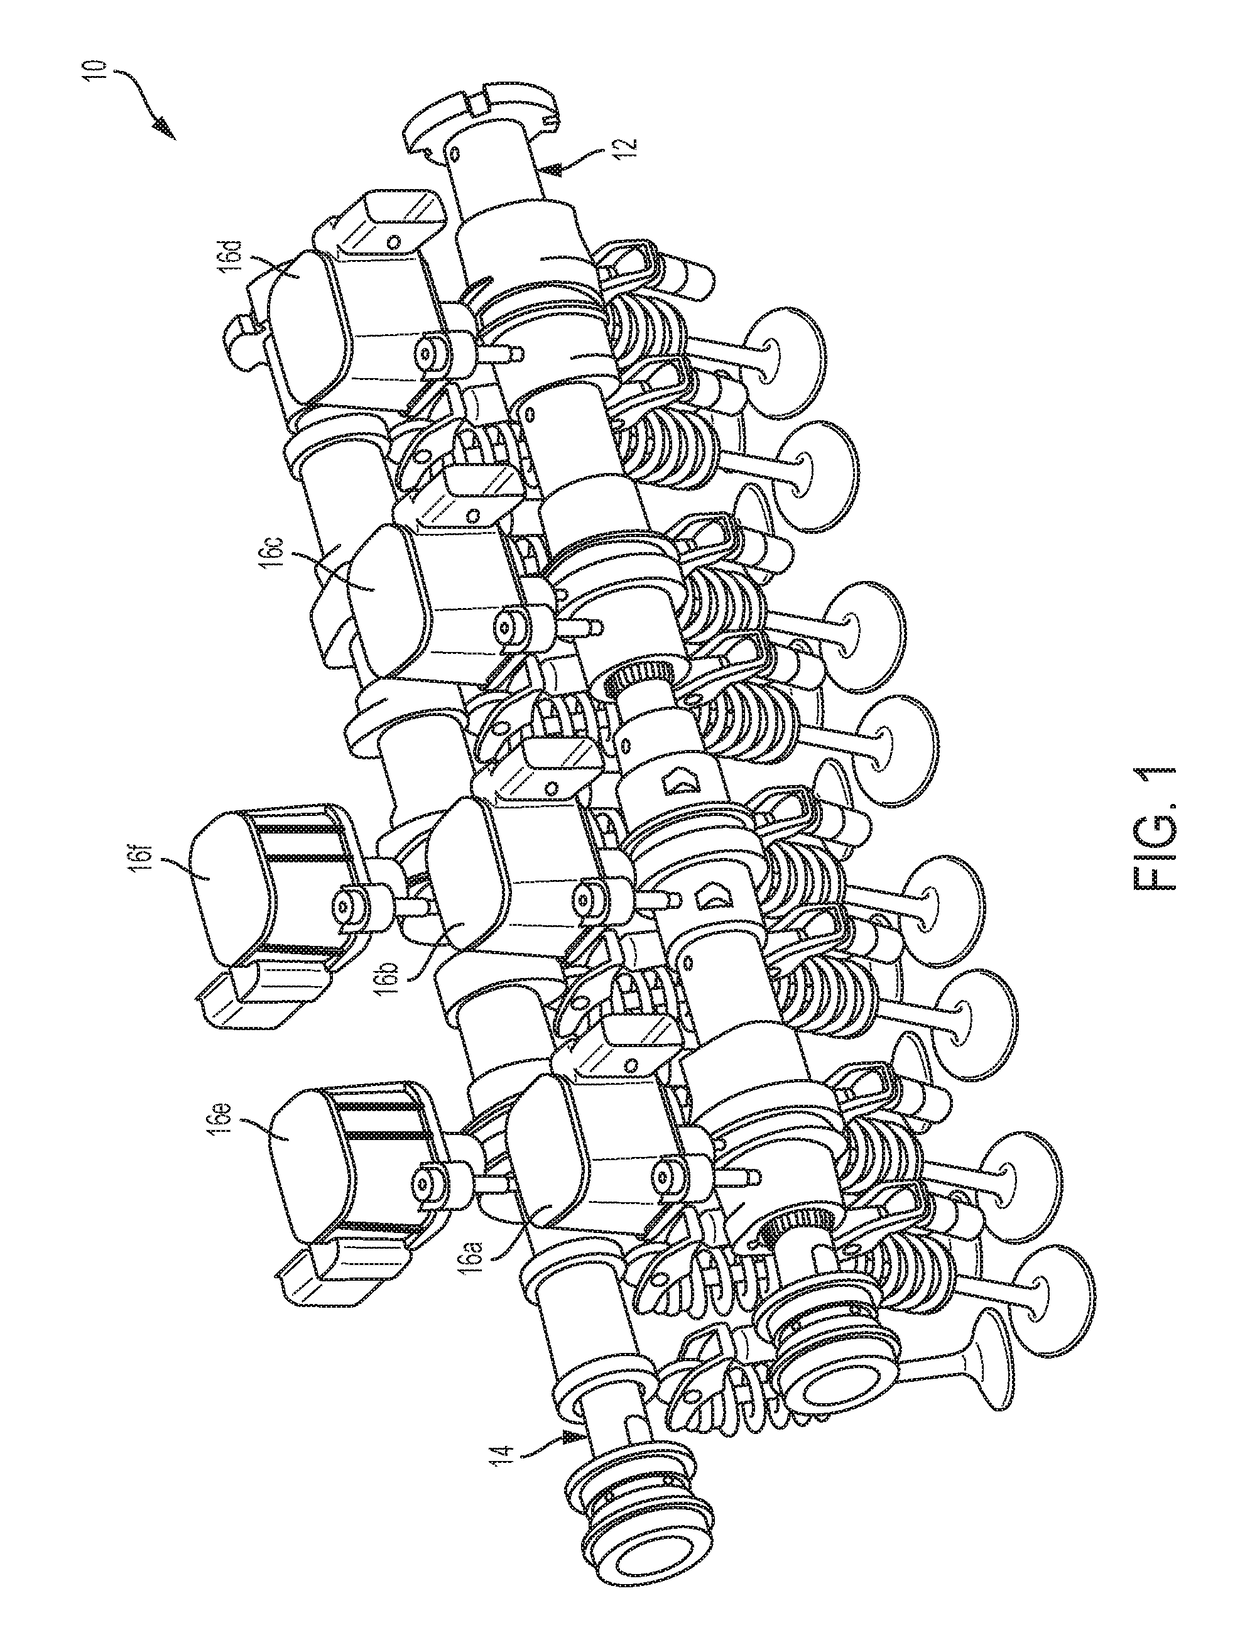 Method of noise filtering a sliding camshaft actuator pin position output signal